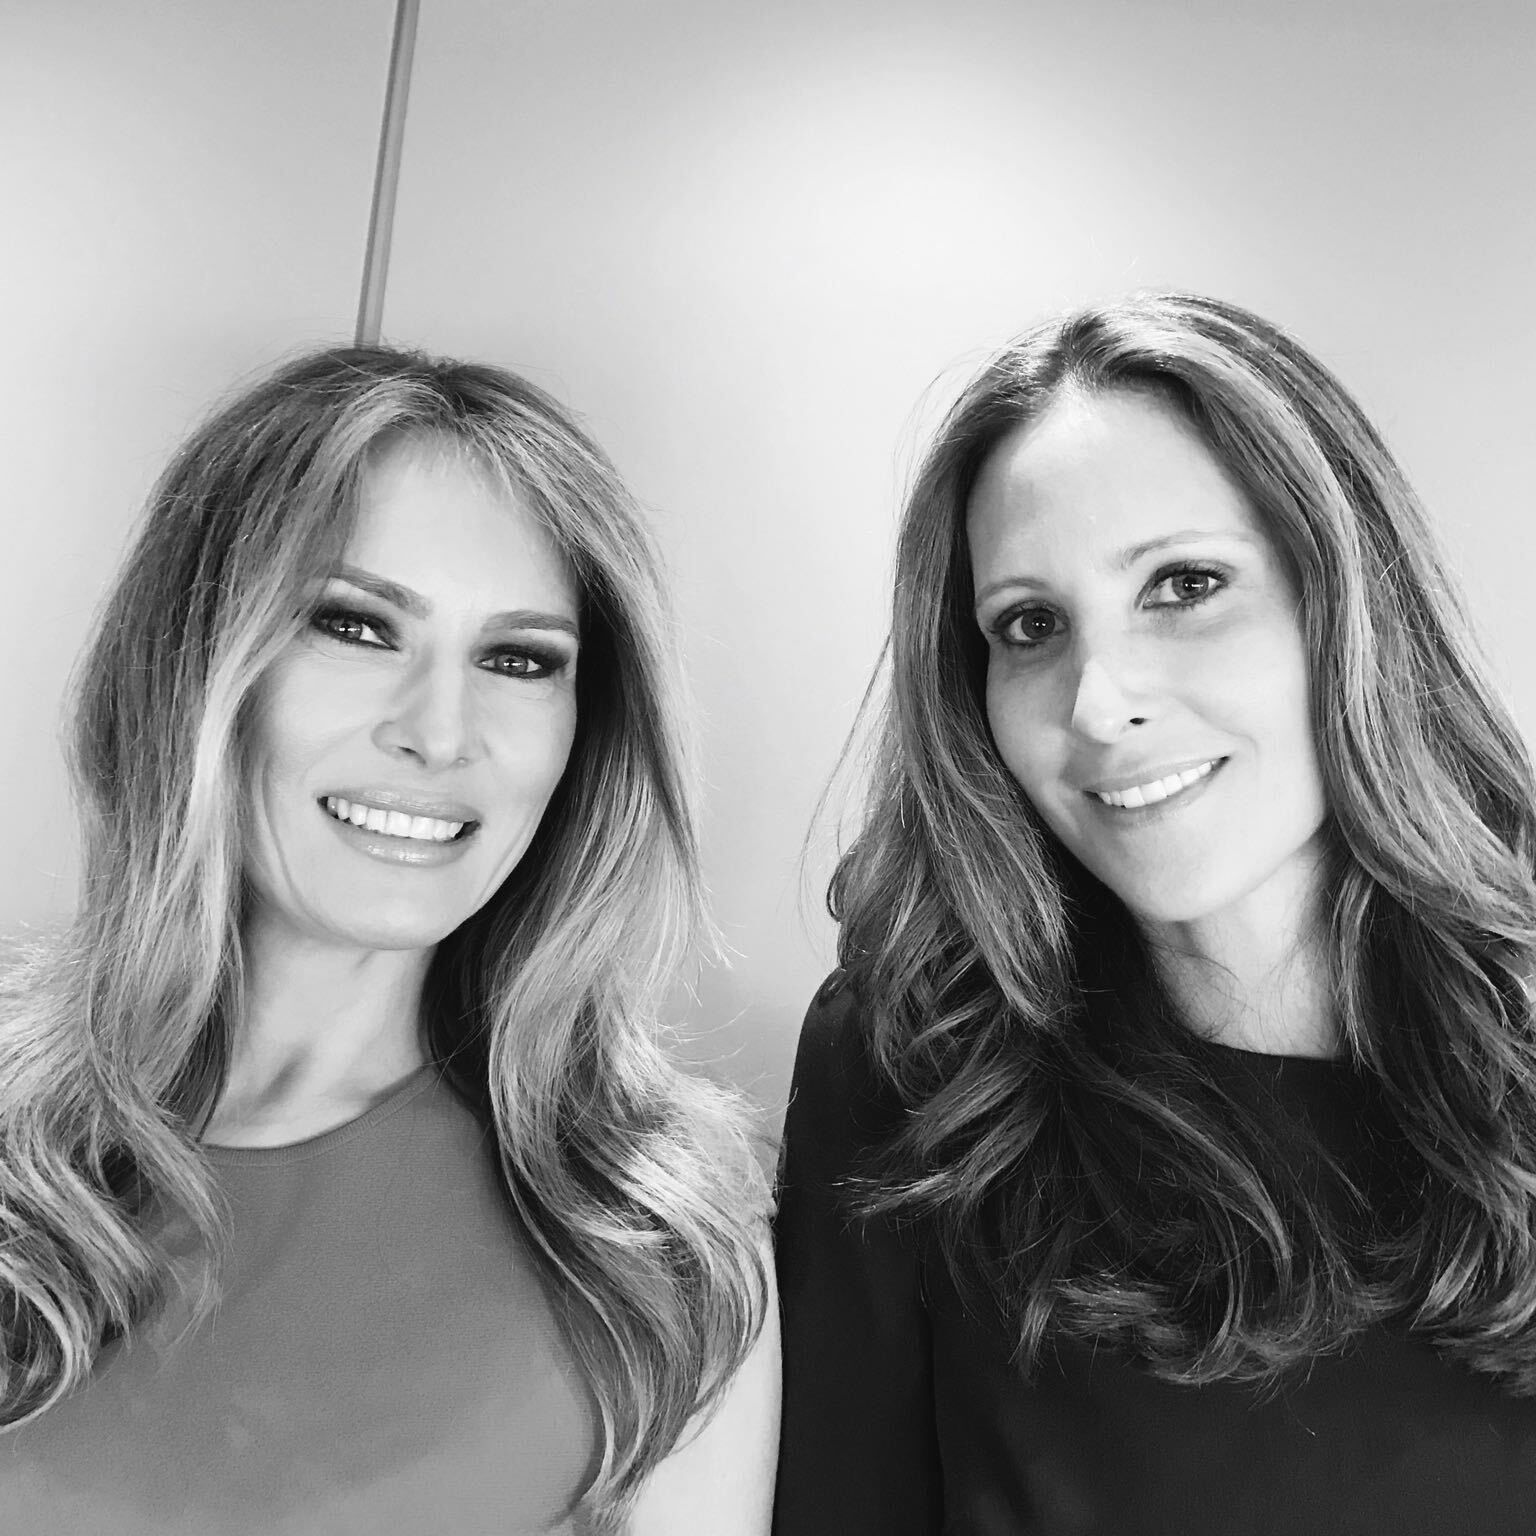 Excerpt Melania and Me, by Stephanie Winston Wolkoff